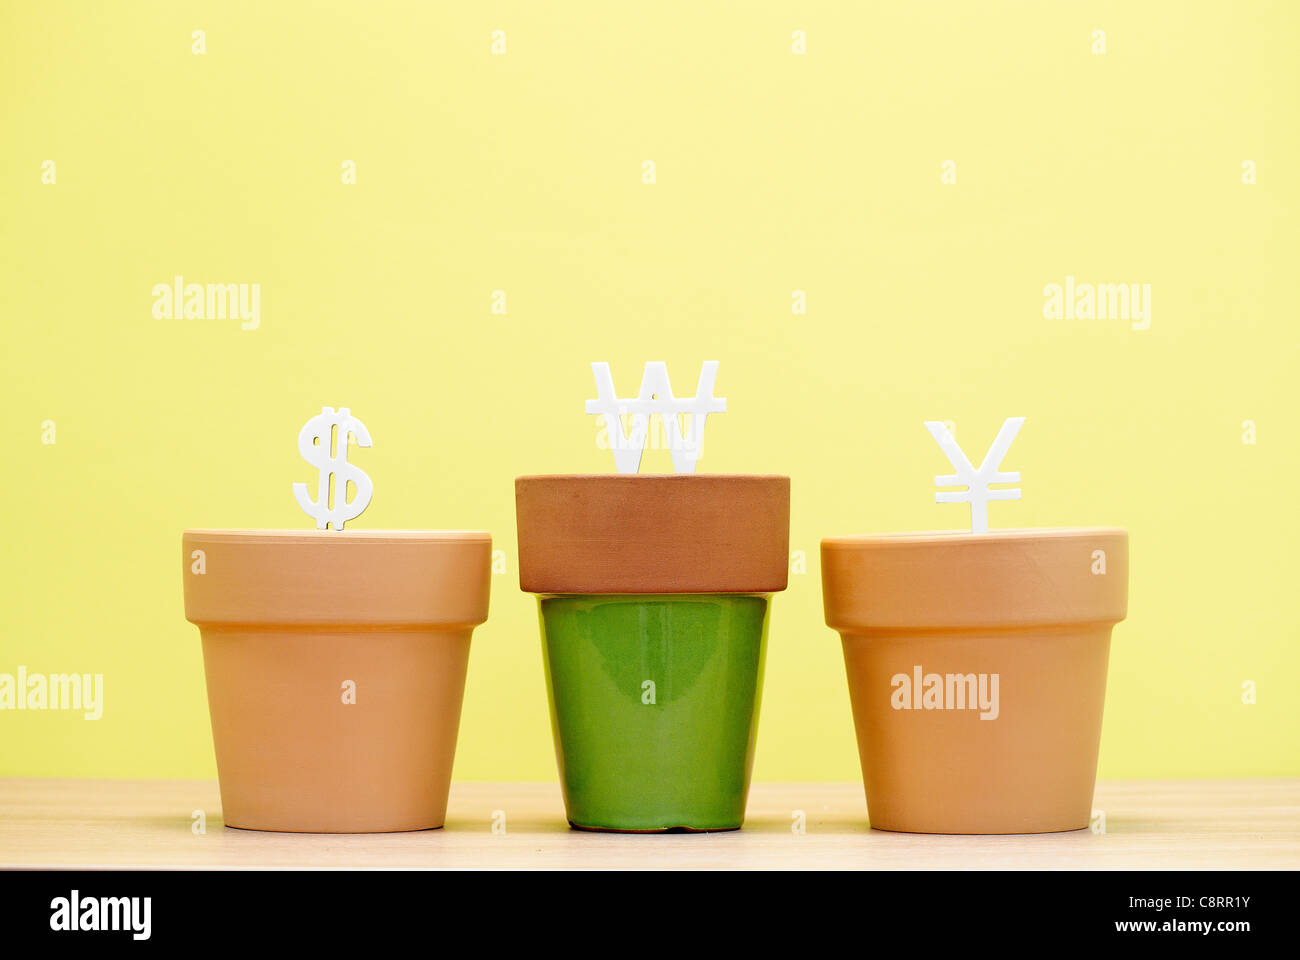 Three plant pots containing three different currency symbol Stock Photo